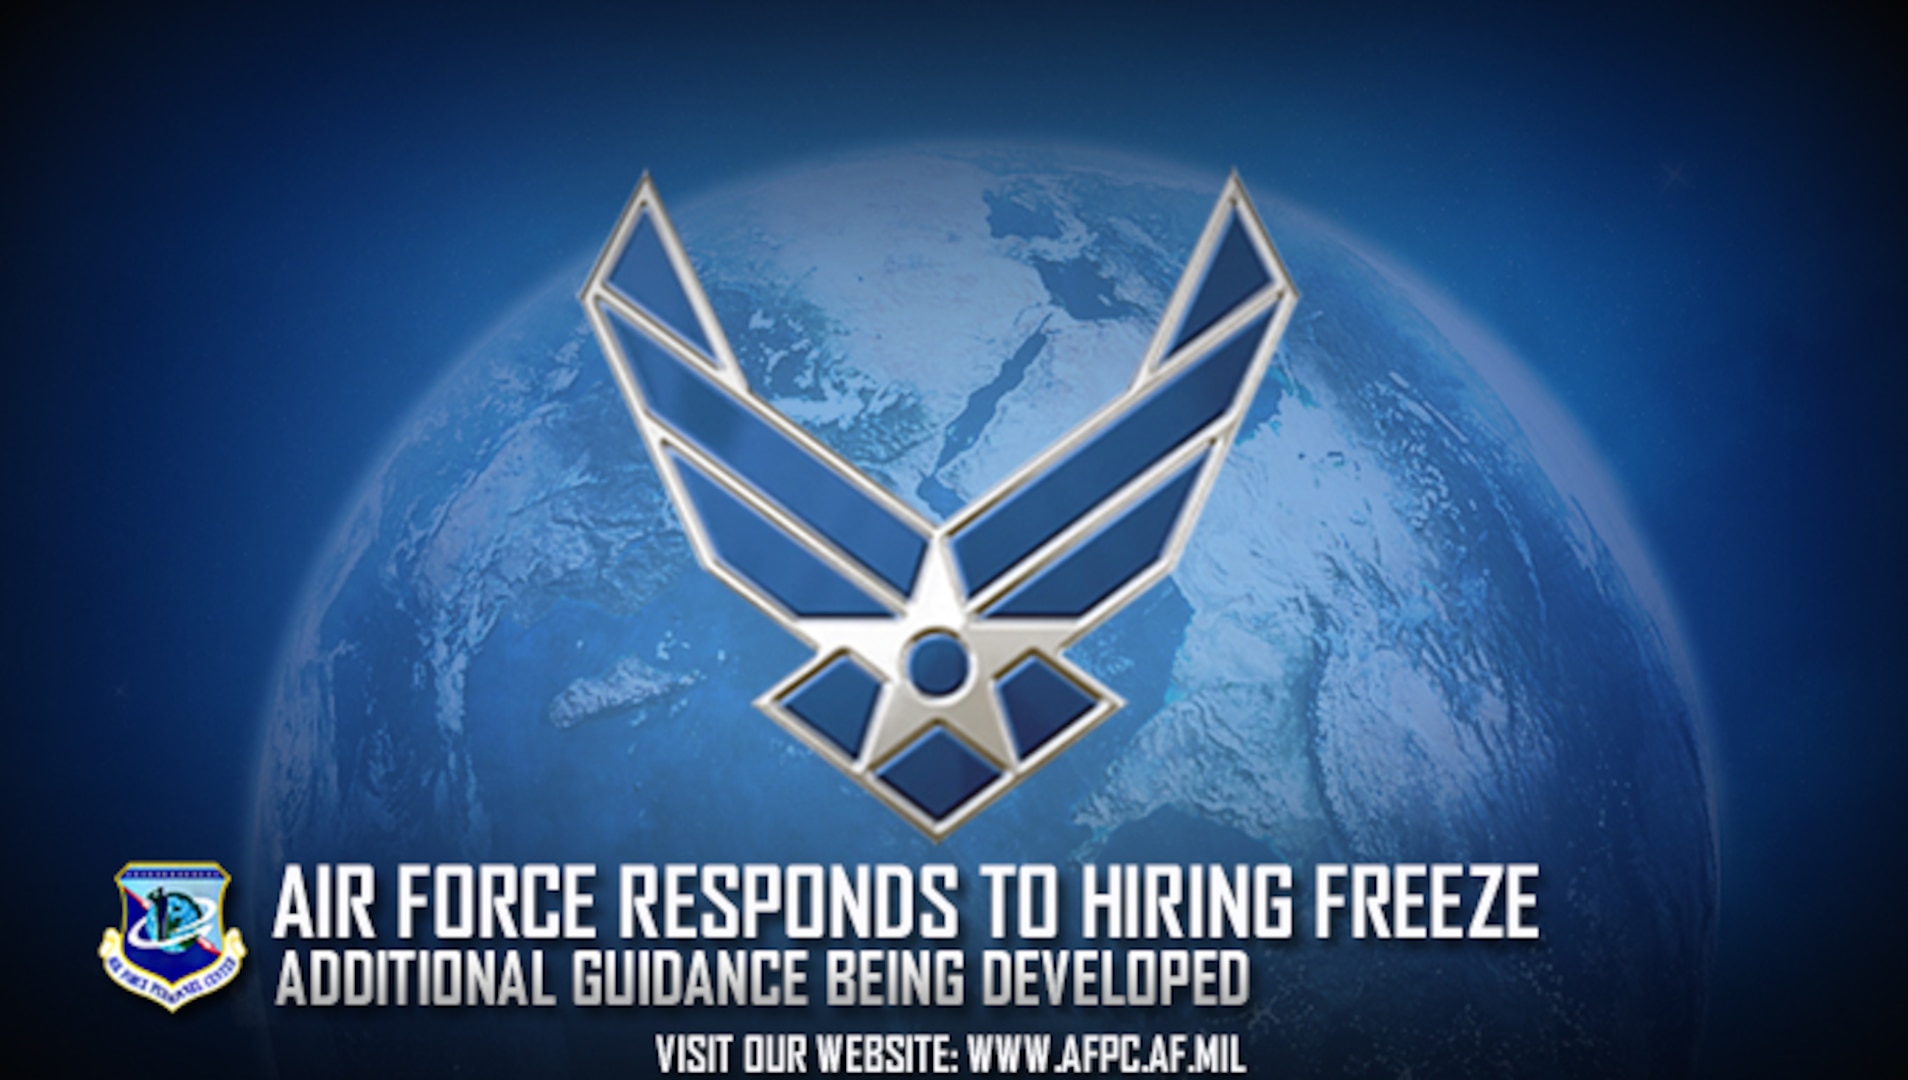 The Air Force is working with the Defense Department to provide additional guidance on the federal civilian hiring freeze implemented Jan. 23. The Air Force Personnel Center will provide individual notices to those directly affected by this freeze.  (U.S. Air Force graphic by Rob Lyon)